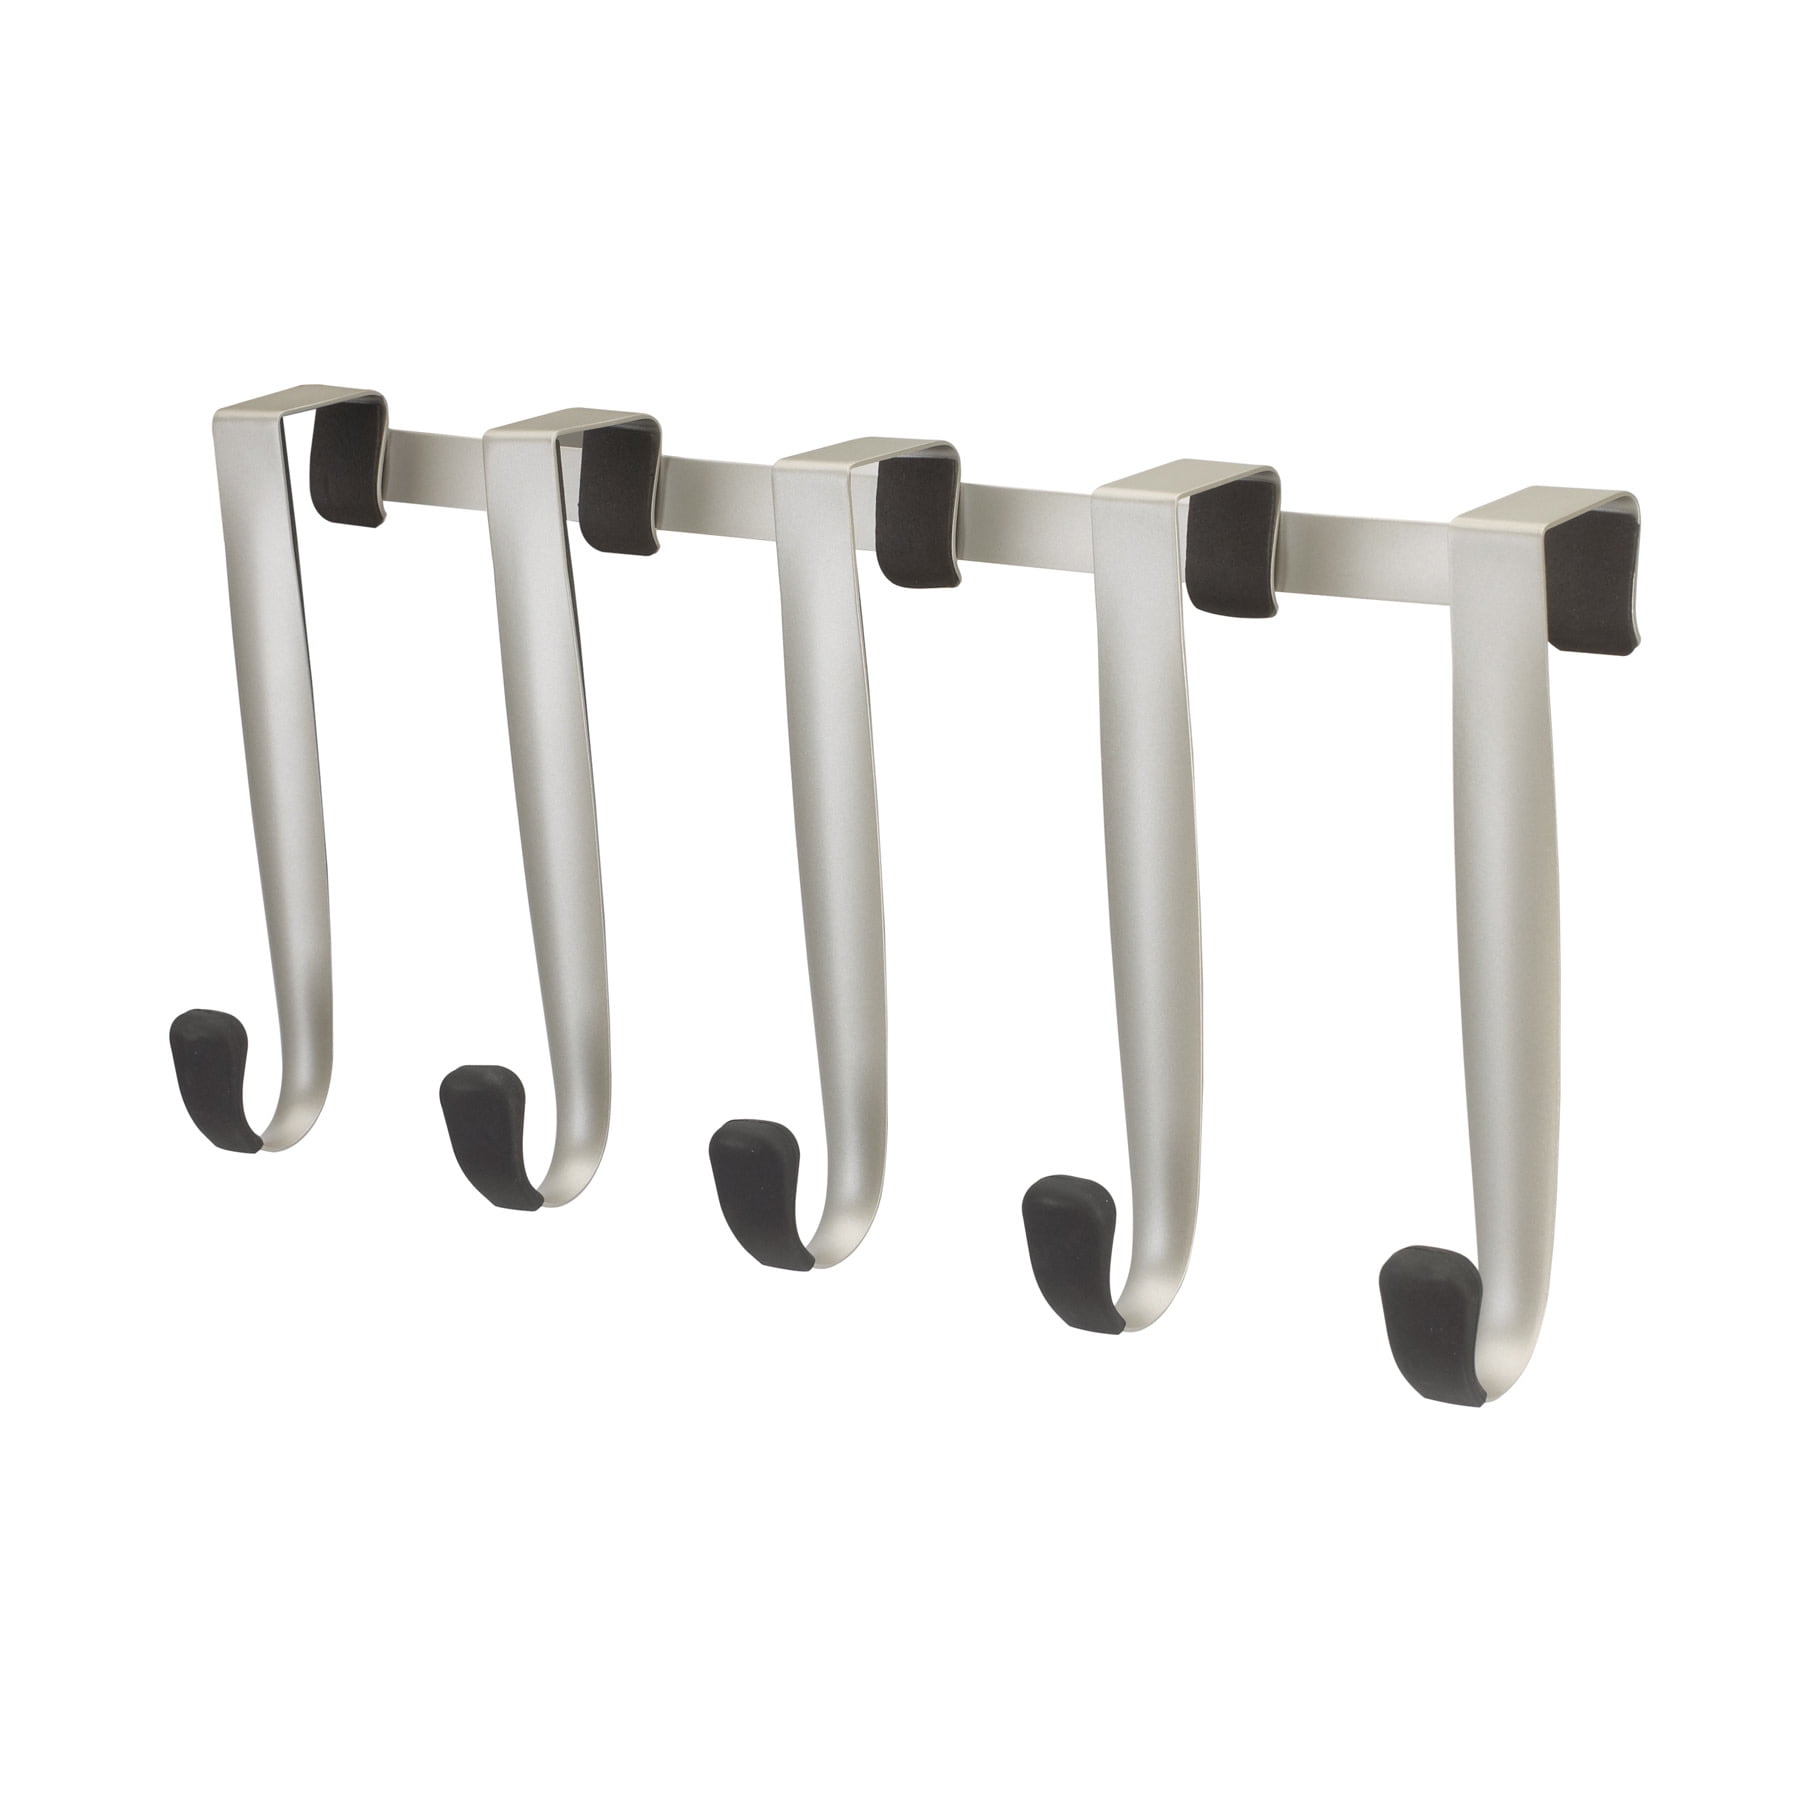 Unilive Human Stainless Over Door Double Hooks Reusable for Home,Office & Closet Storage Blue 